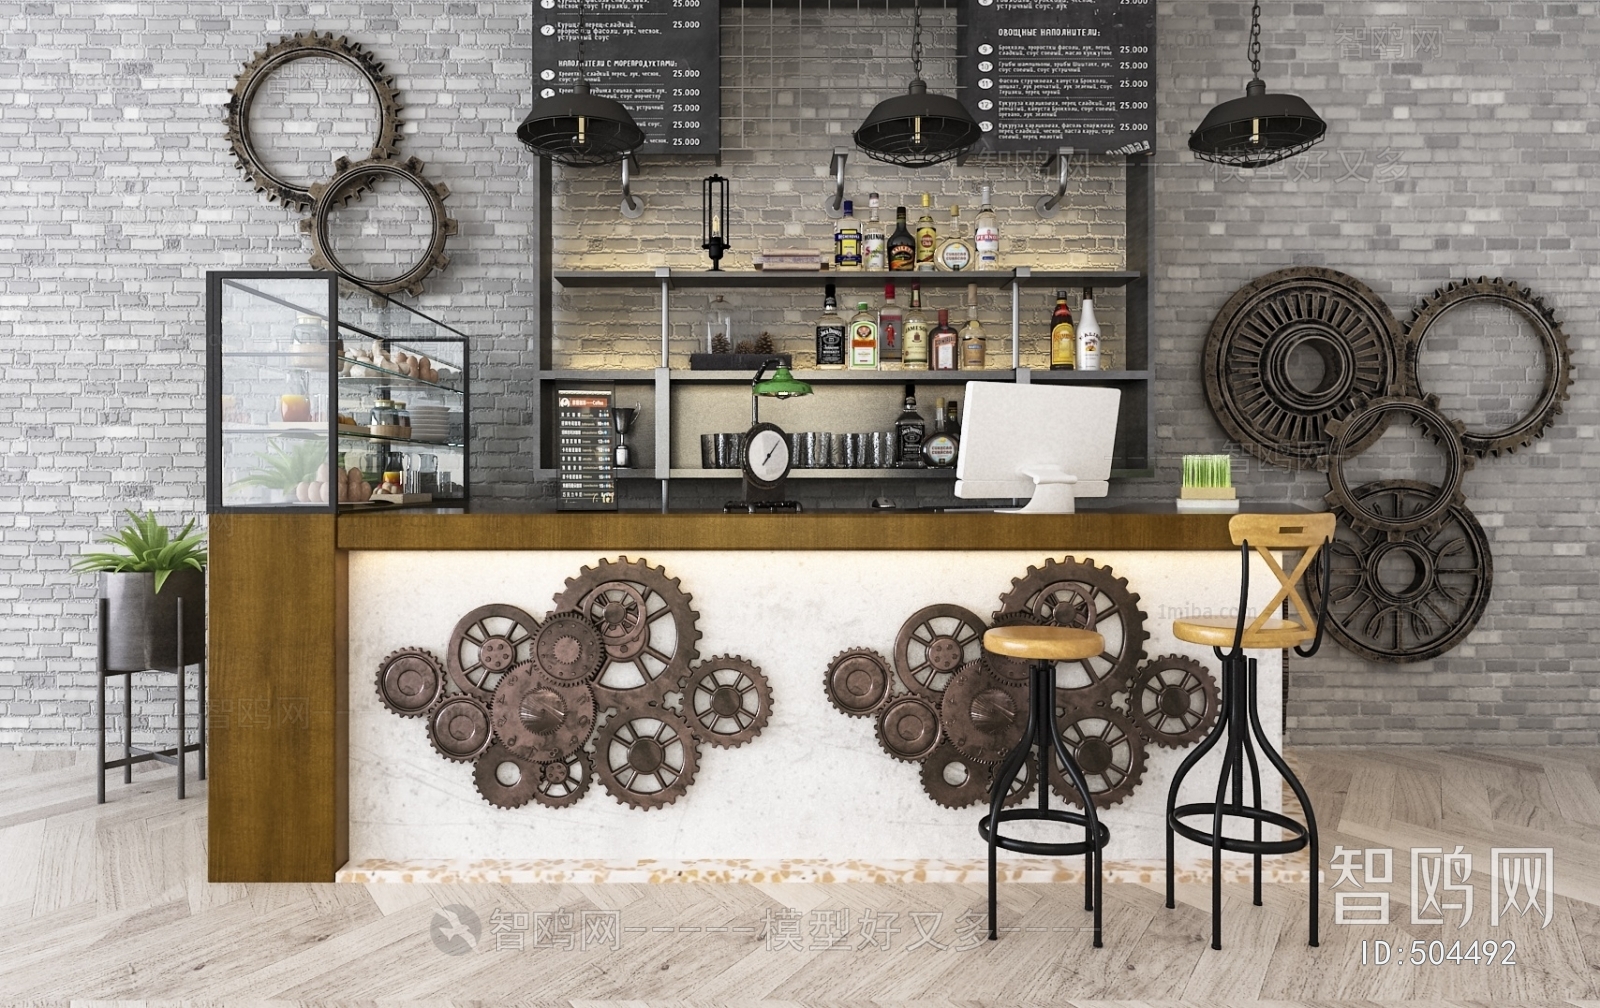 Industrial Style Counter Bar